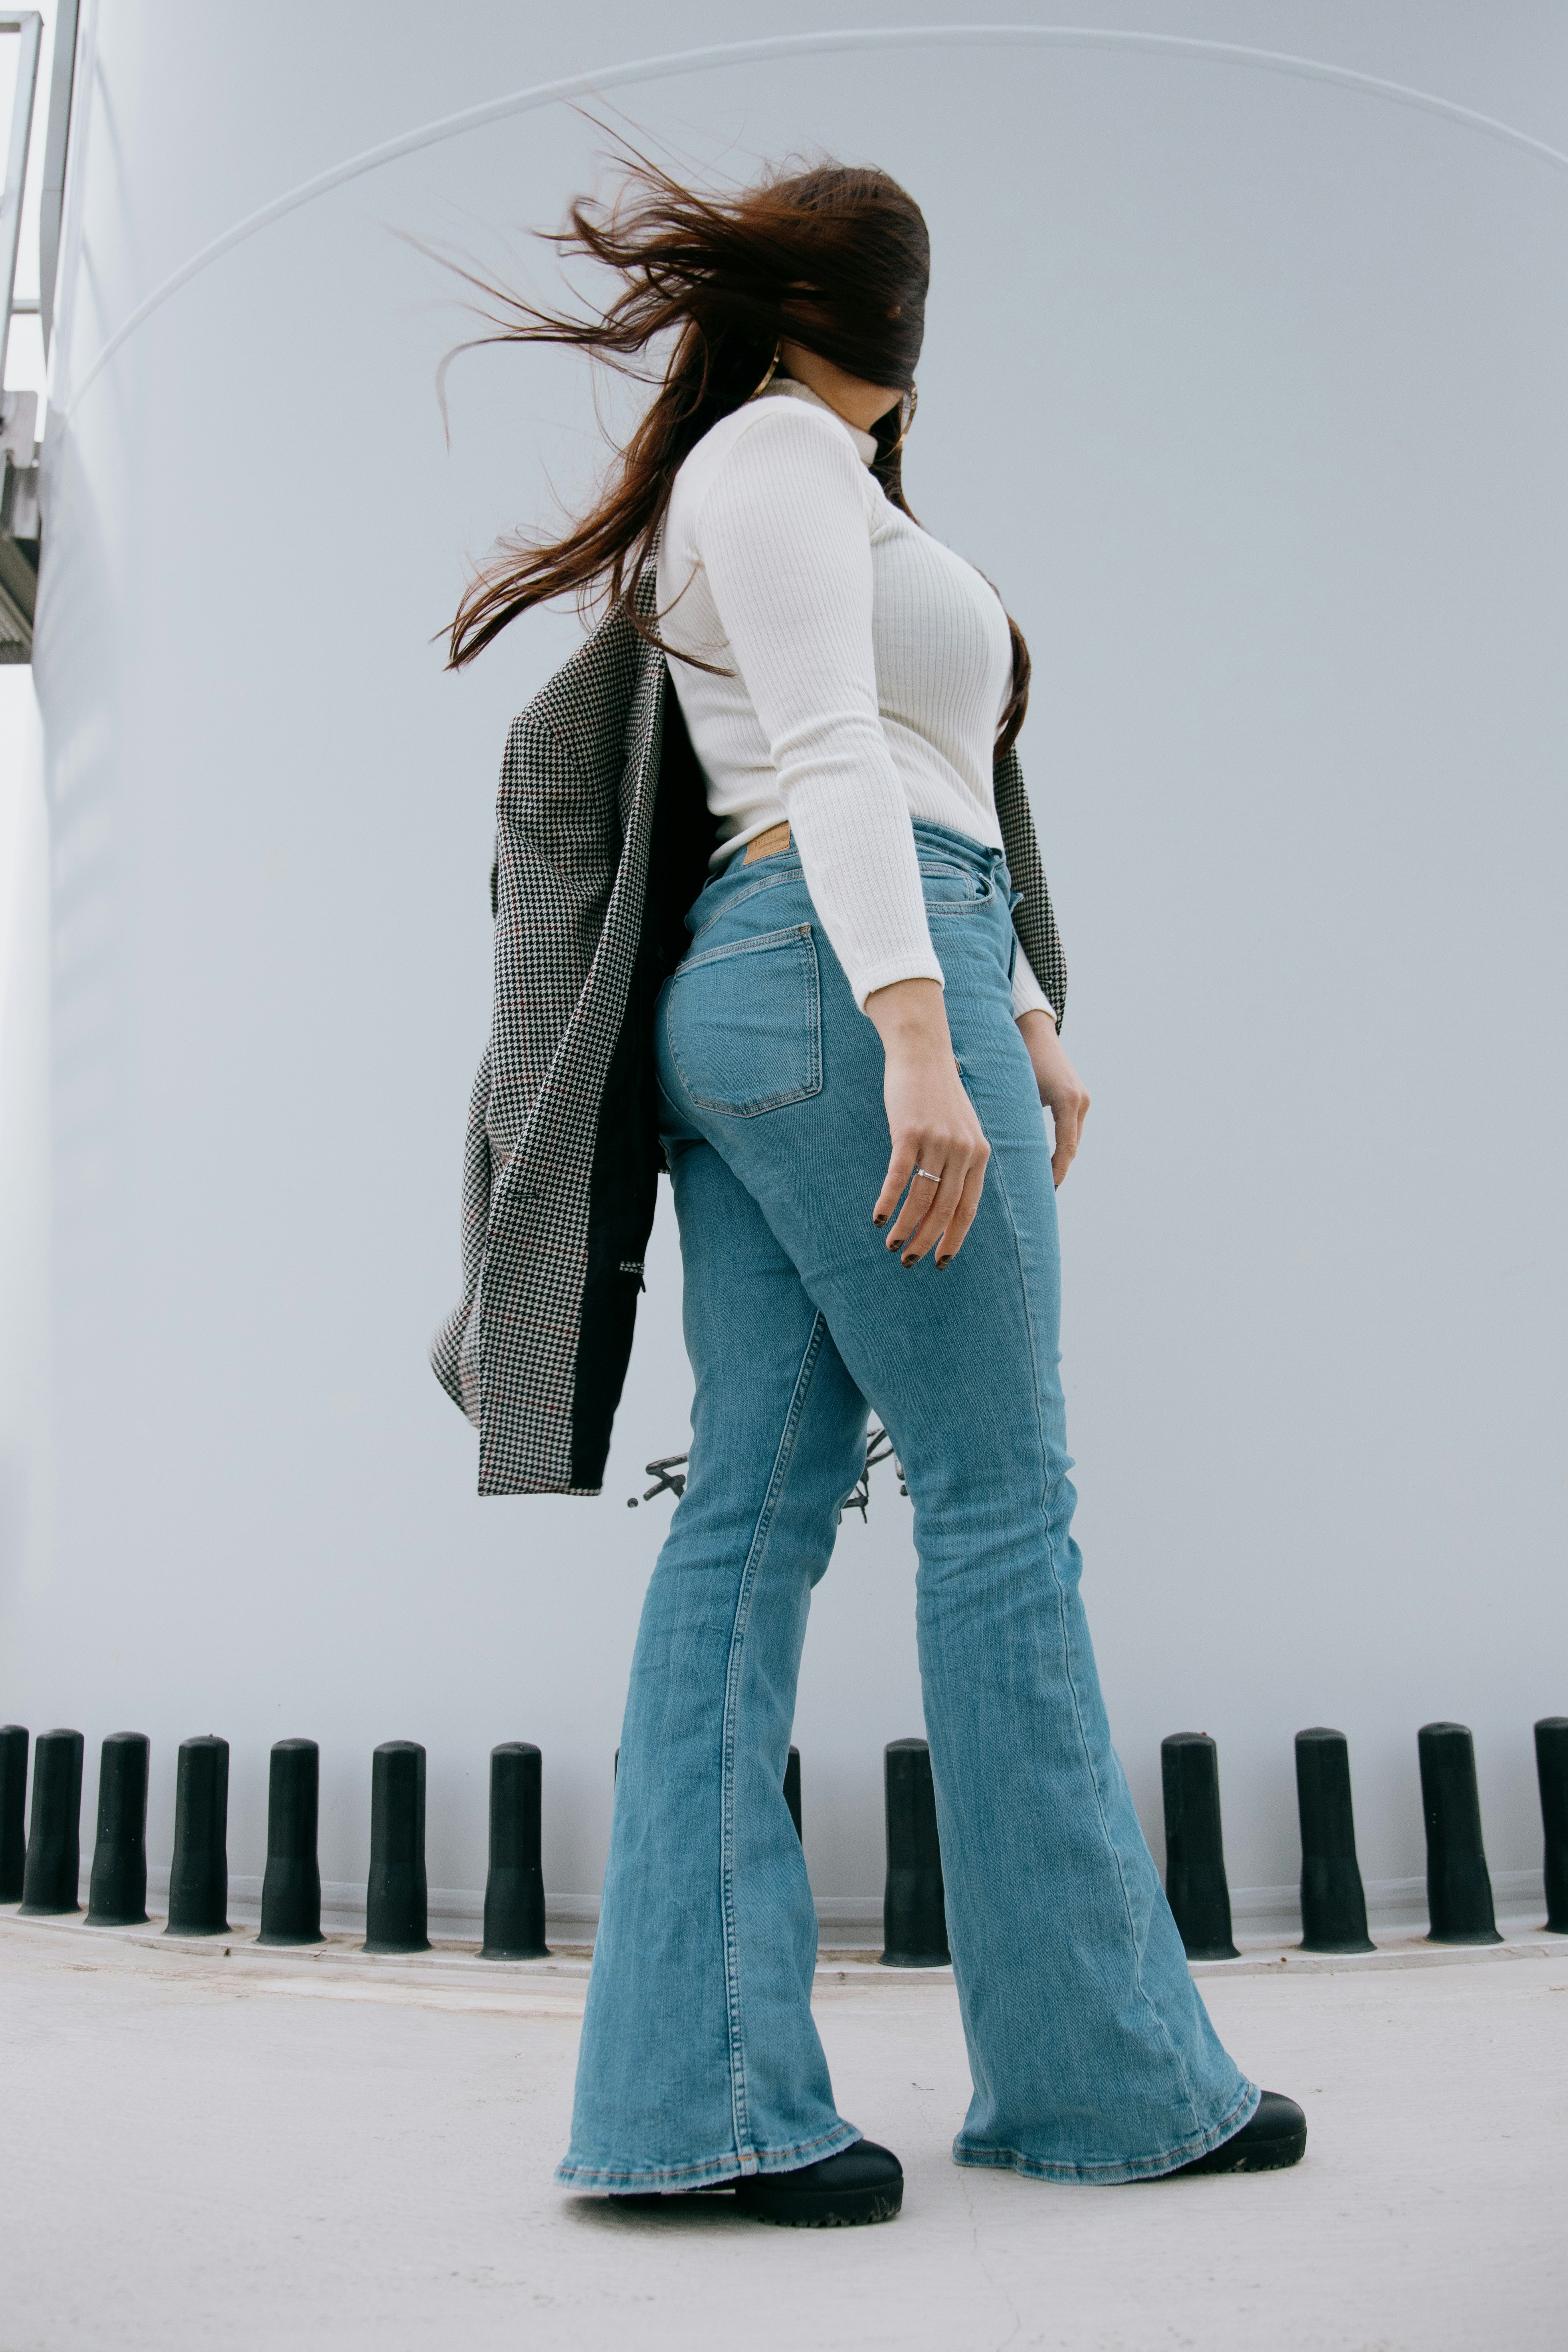 woman in white shirt and blue denim jeans standing